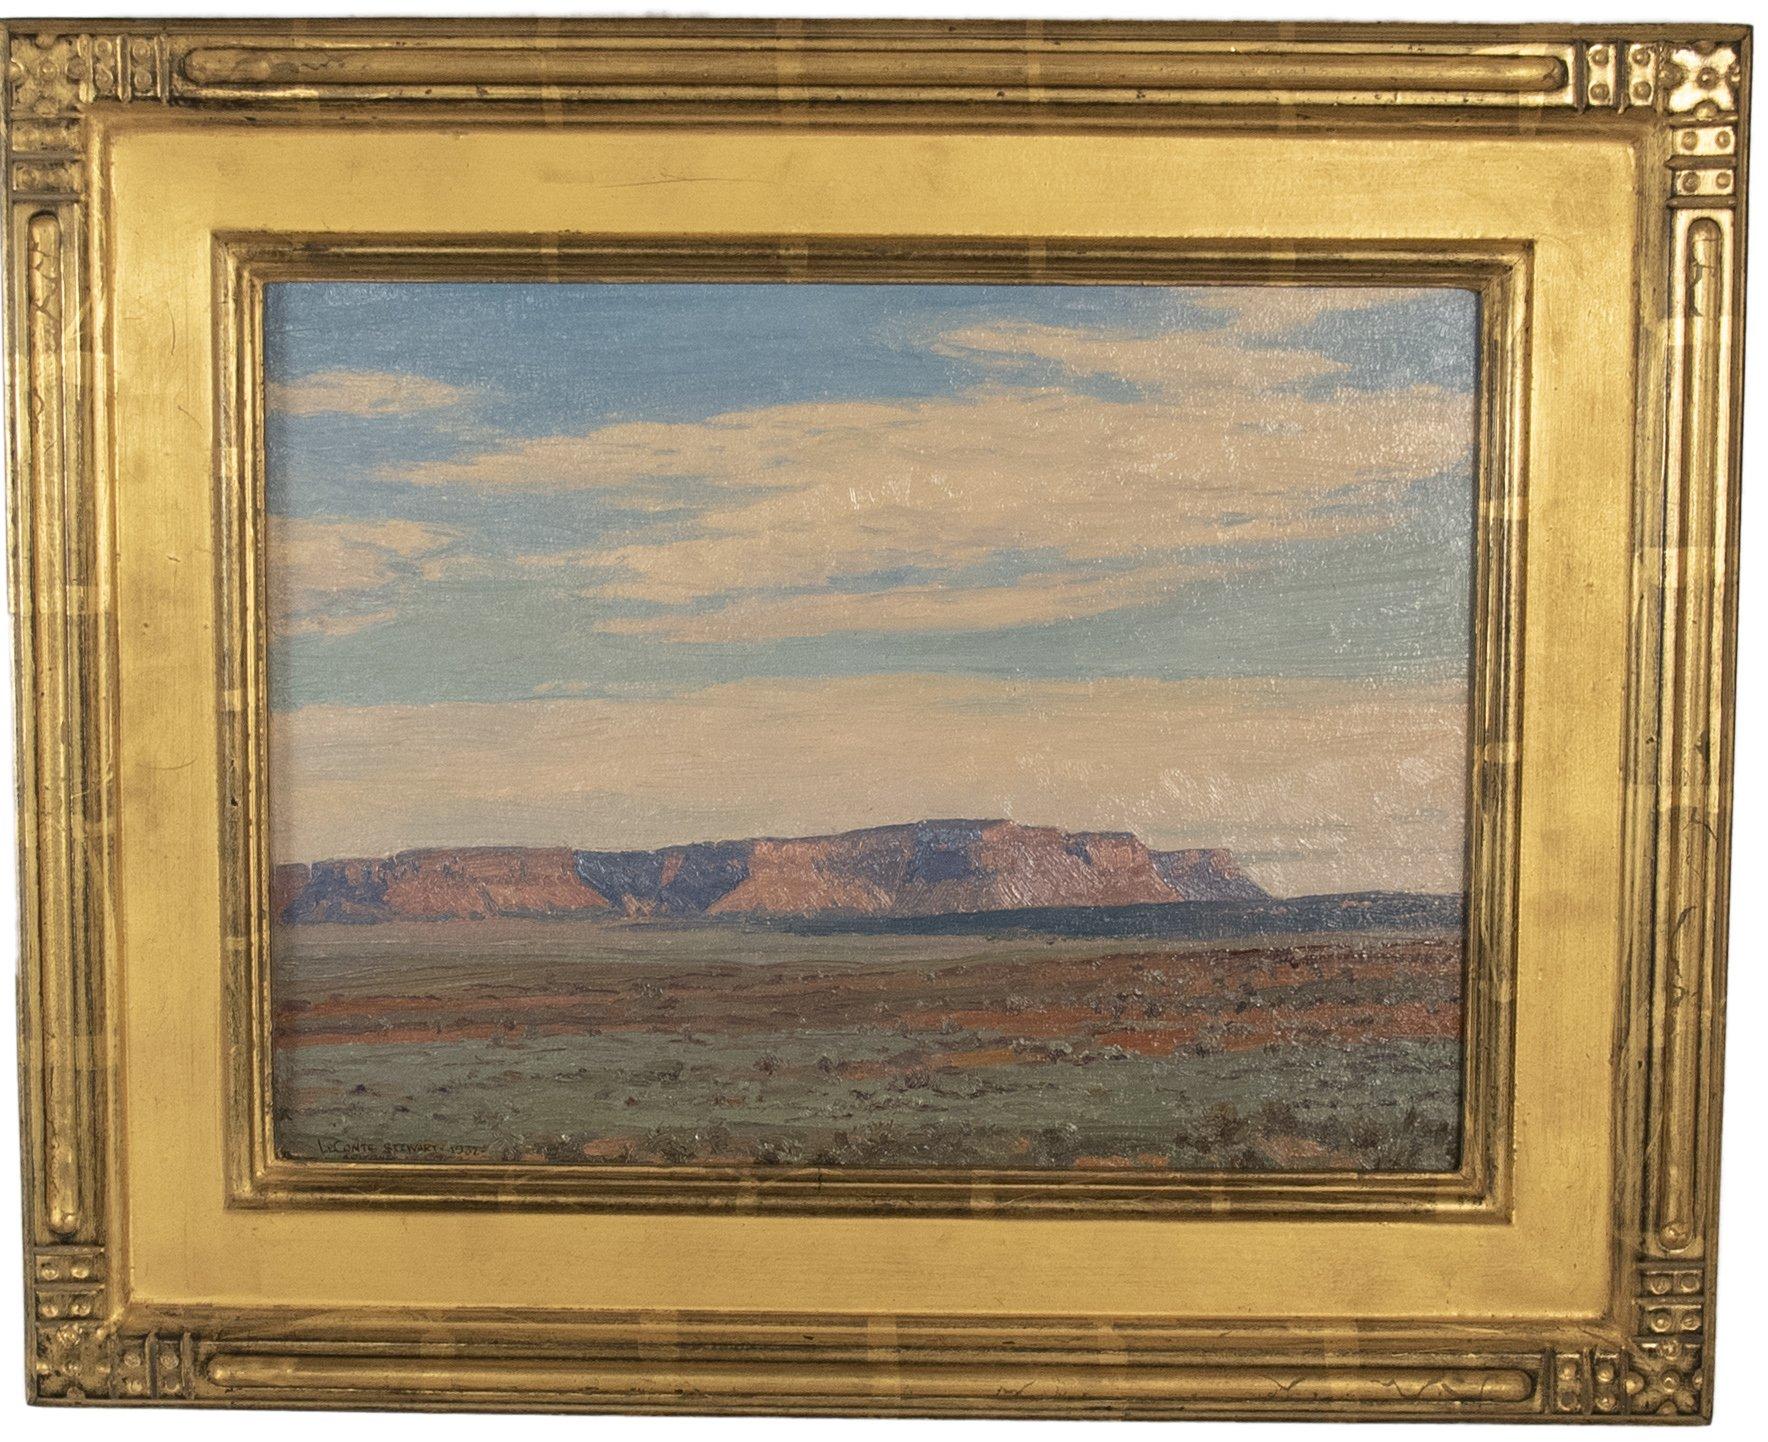 1932

Believed to have been painted with Maynard Dixon 

11 X 15 in. 

From a private Salt Lake City collection.

LeConte Stewart's prolific career was near its peak in 1940 when he produced iconic, masterful landscapes of the Northern Utah valleys,